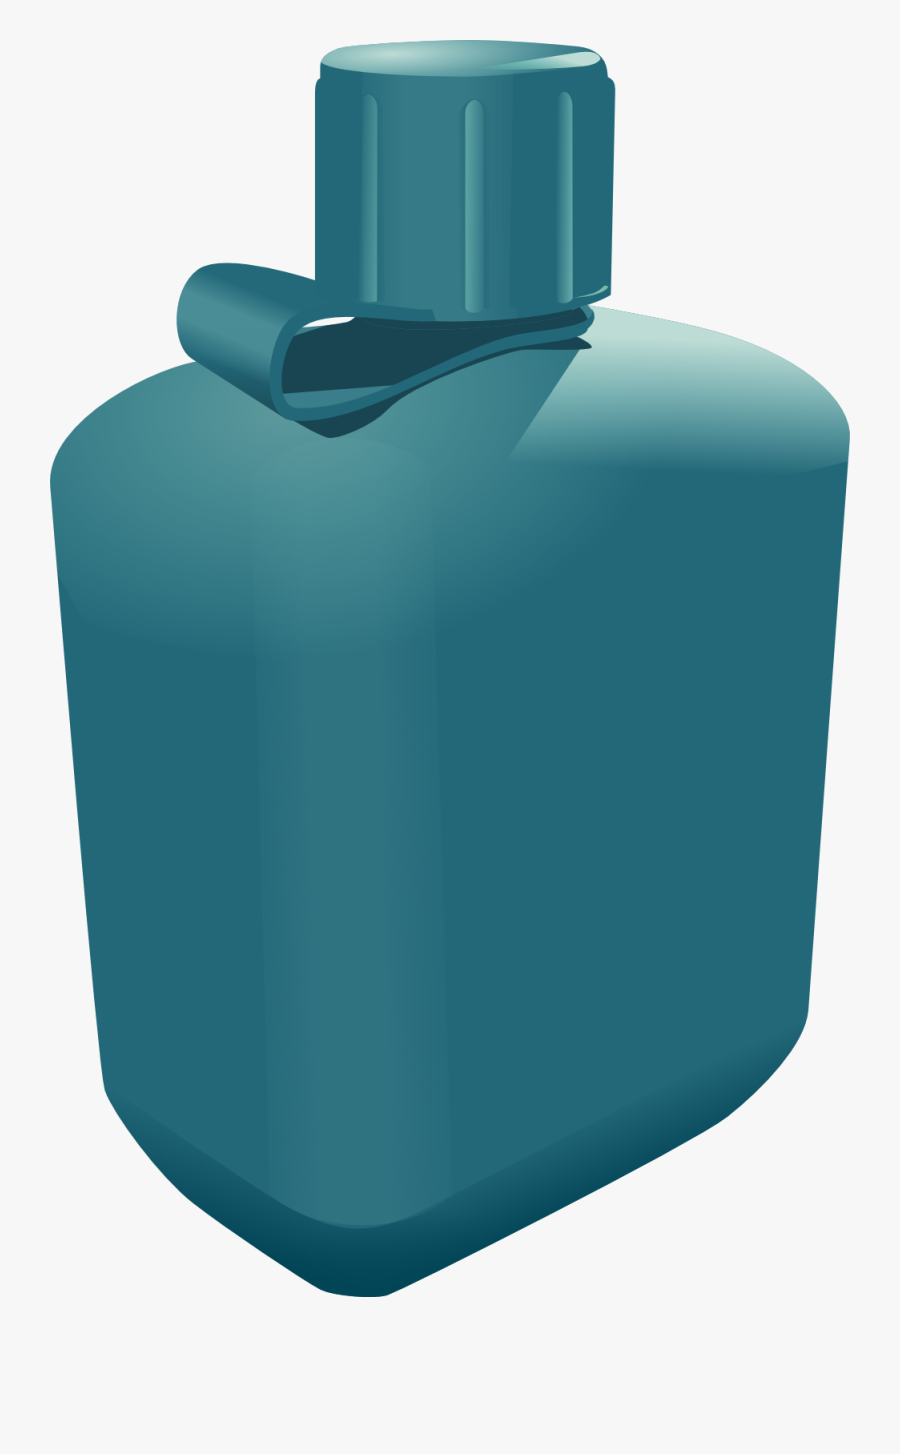 Water Container Clipart, Transparent Clipart